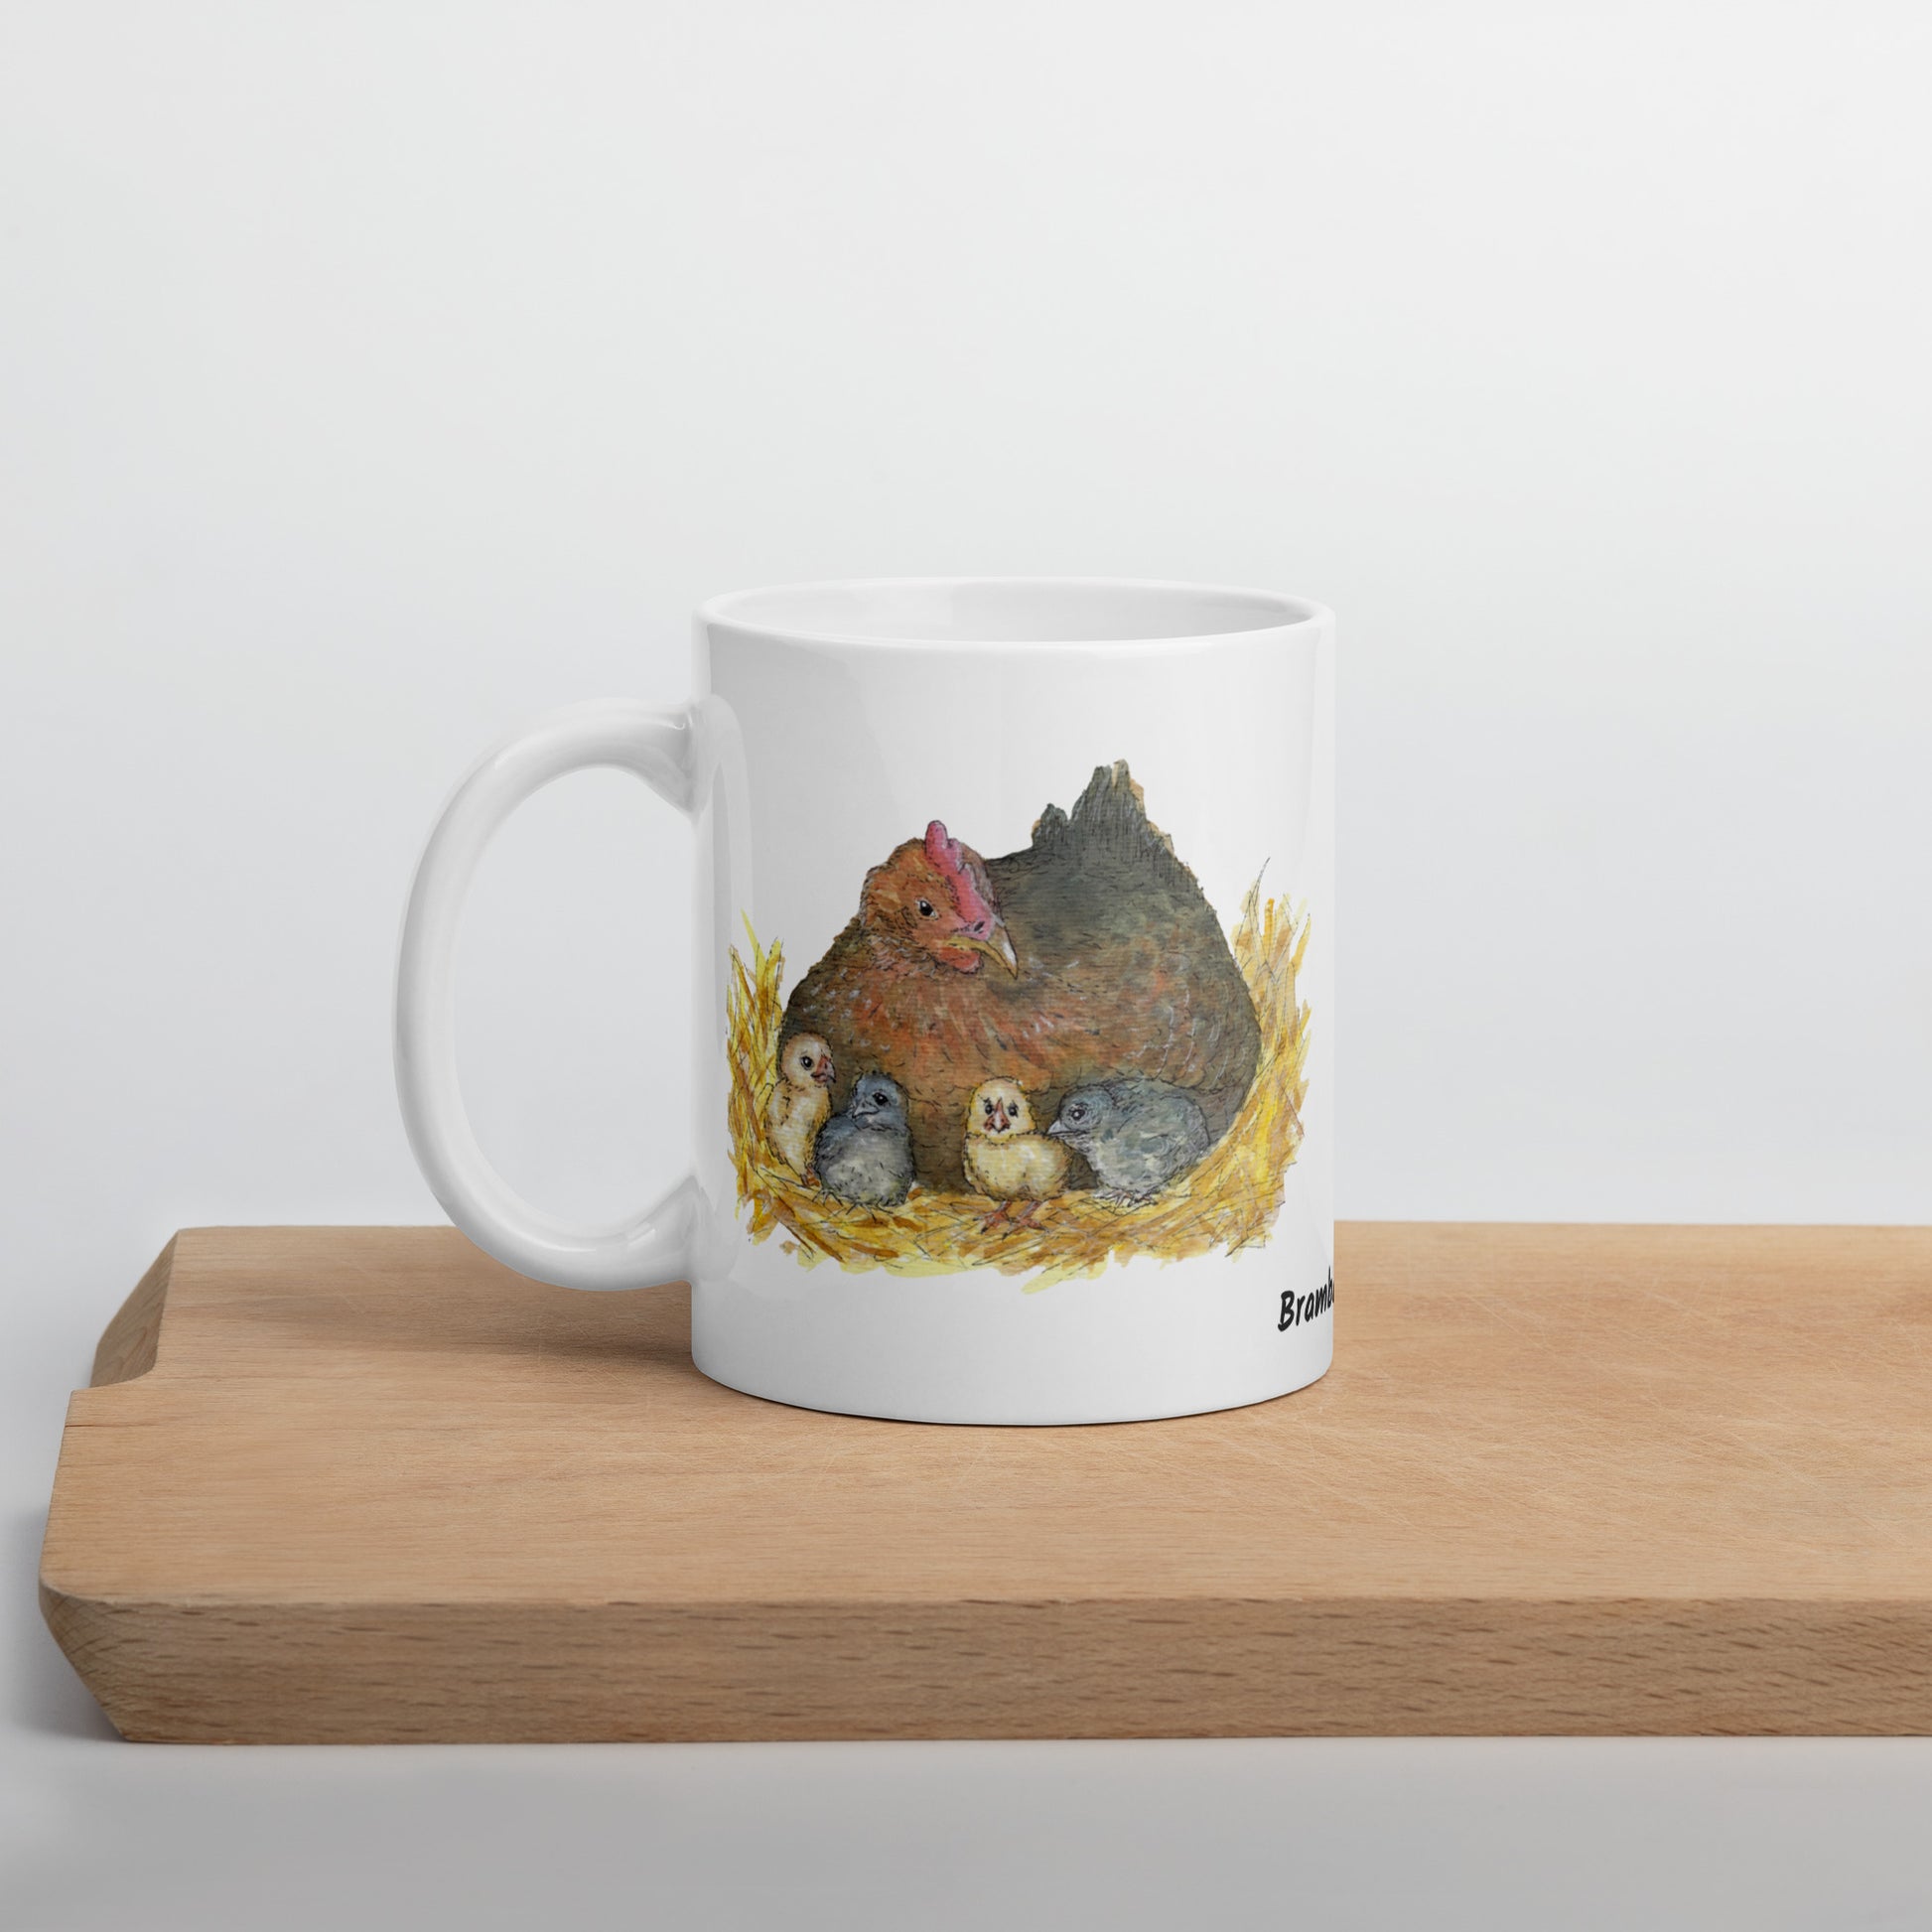 11 ounce white ceramic mug. Features double-sided print of a watercolor mother hen and chicks. Dishwasher and microwave safe. Image shows mug sitting on wooden cutting board.